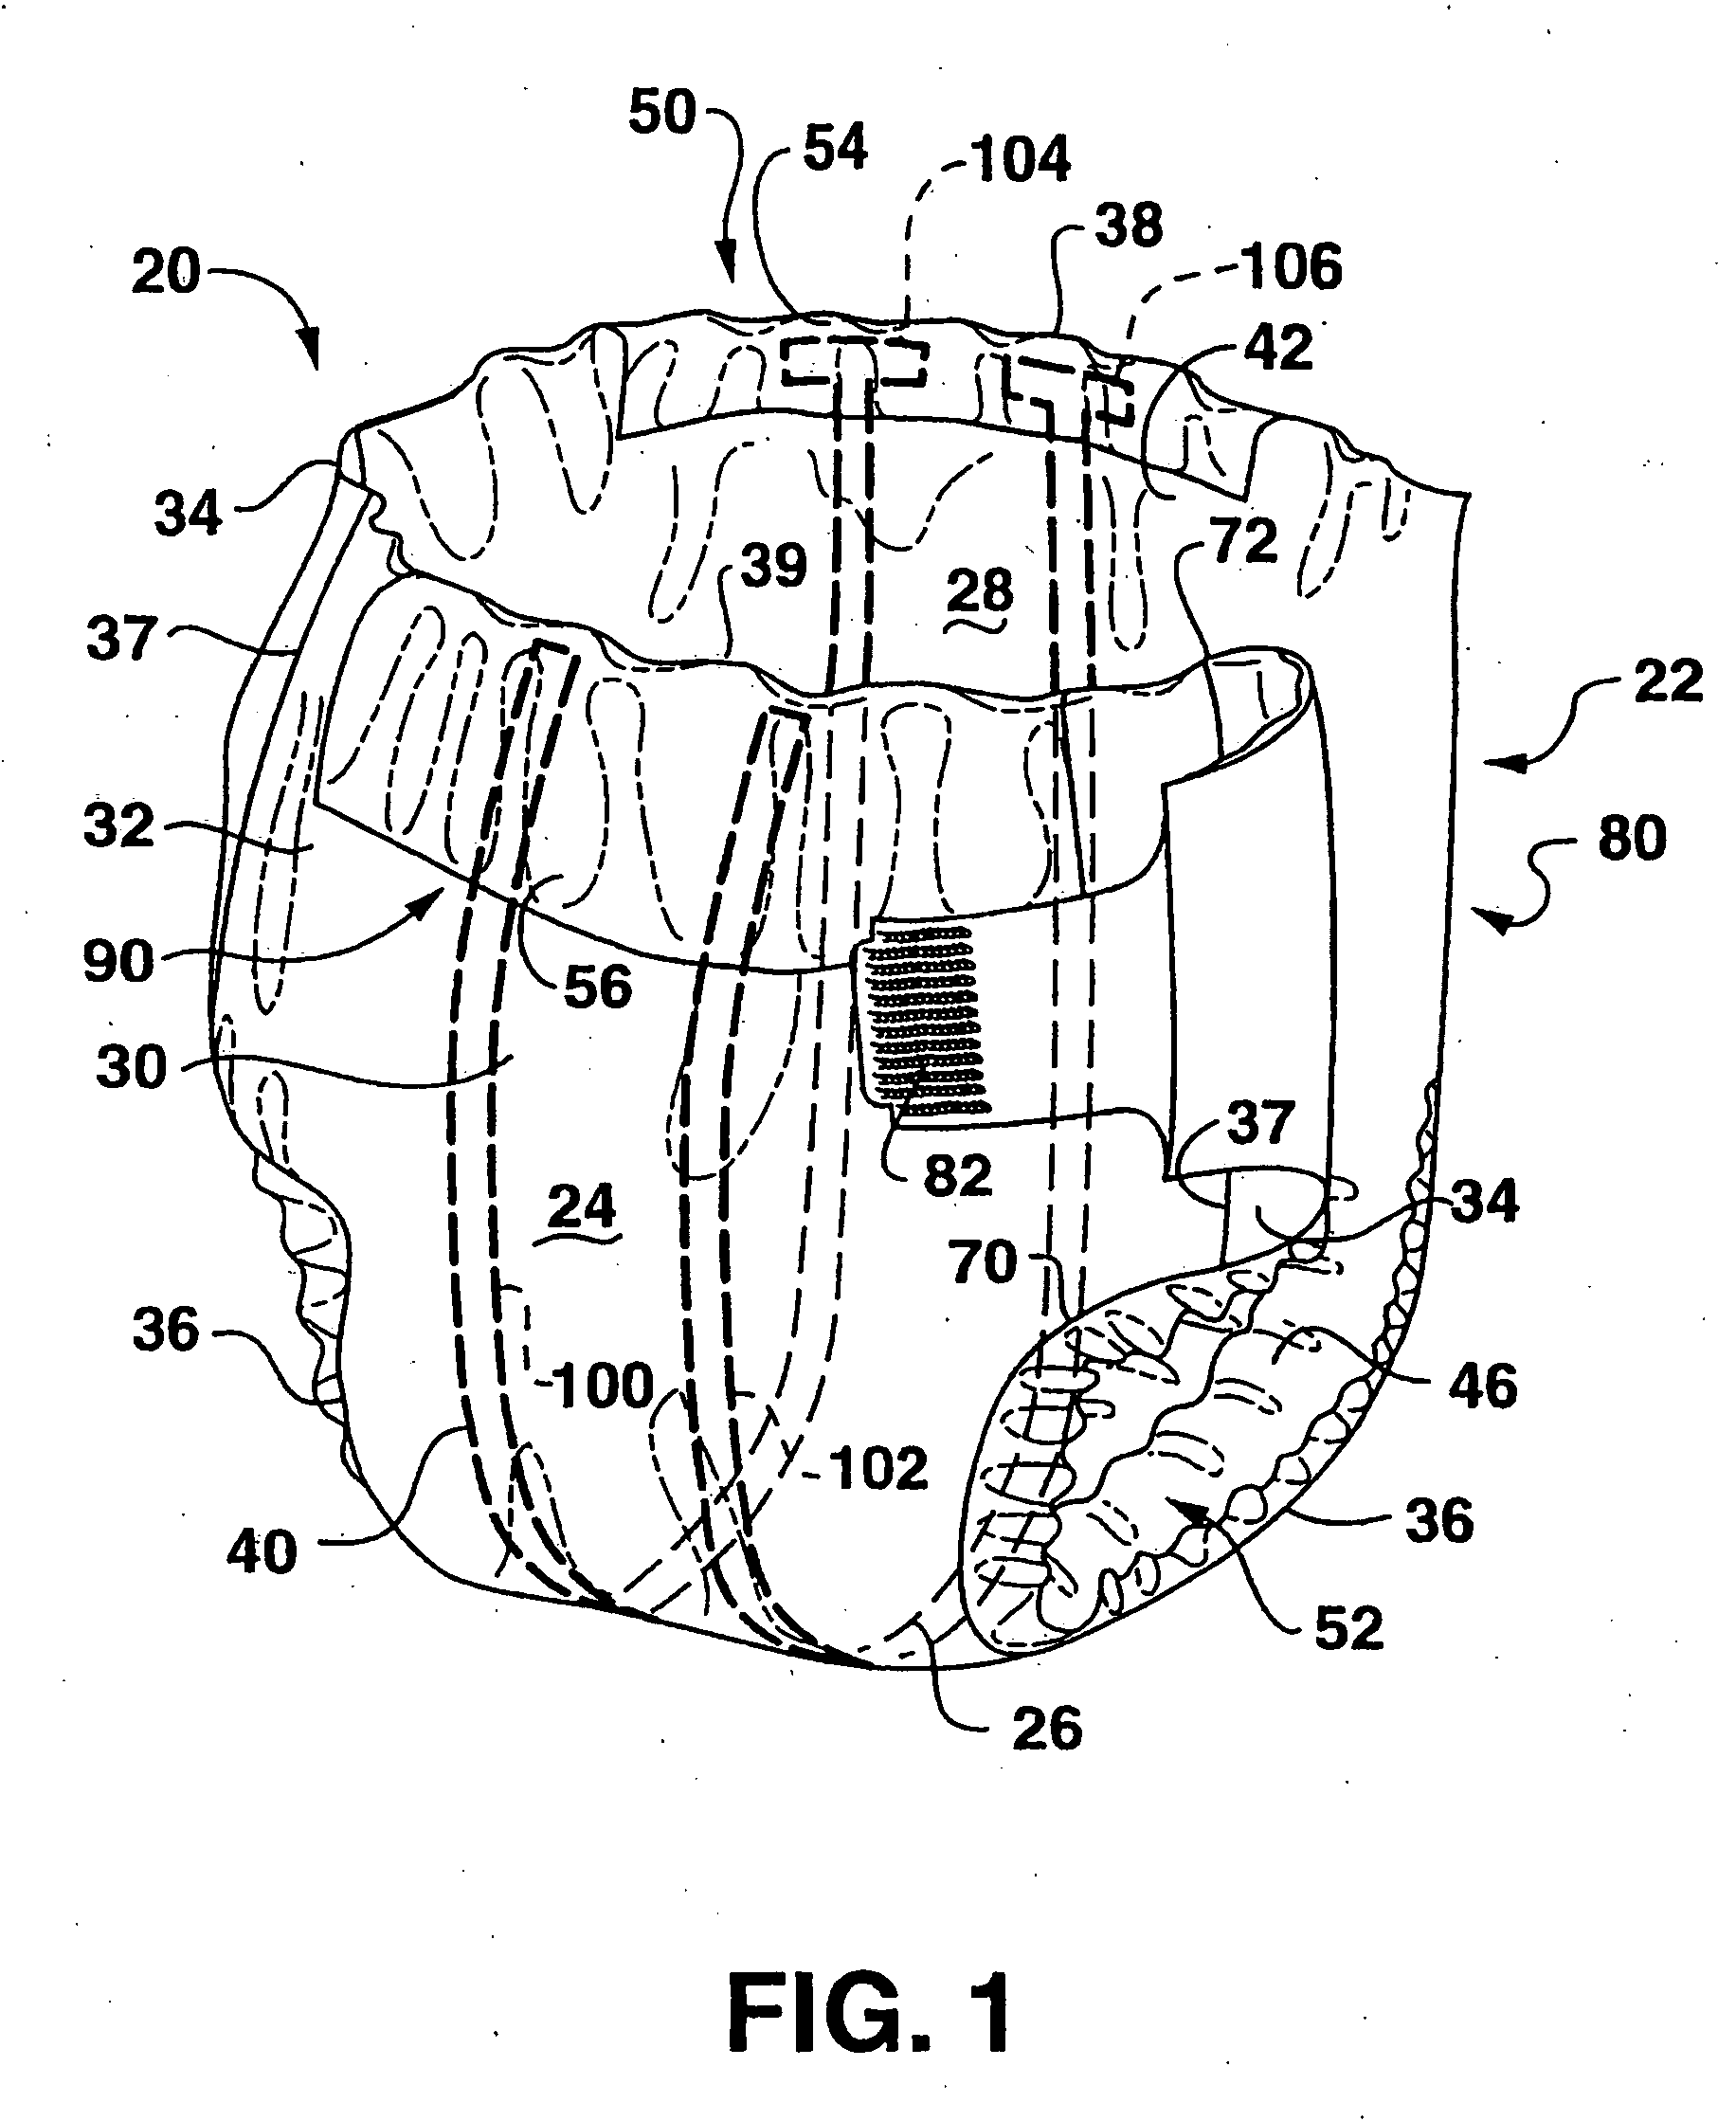 Garments with easy-to-use signaling device